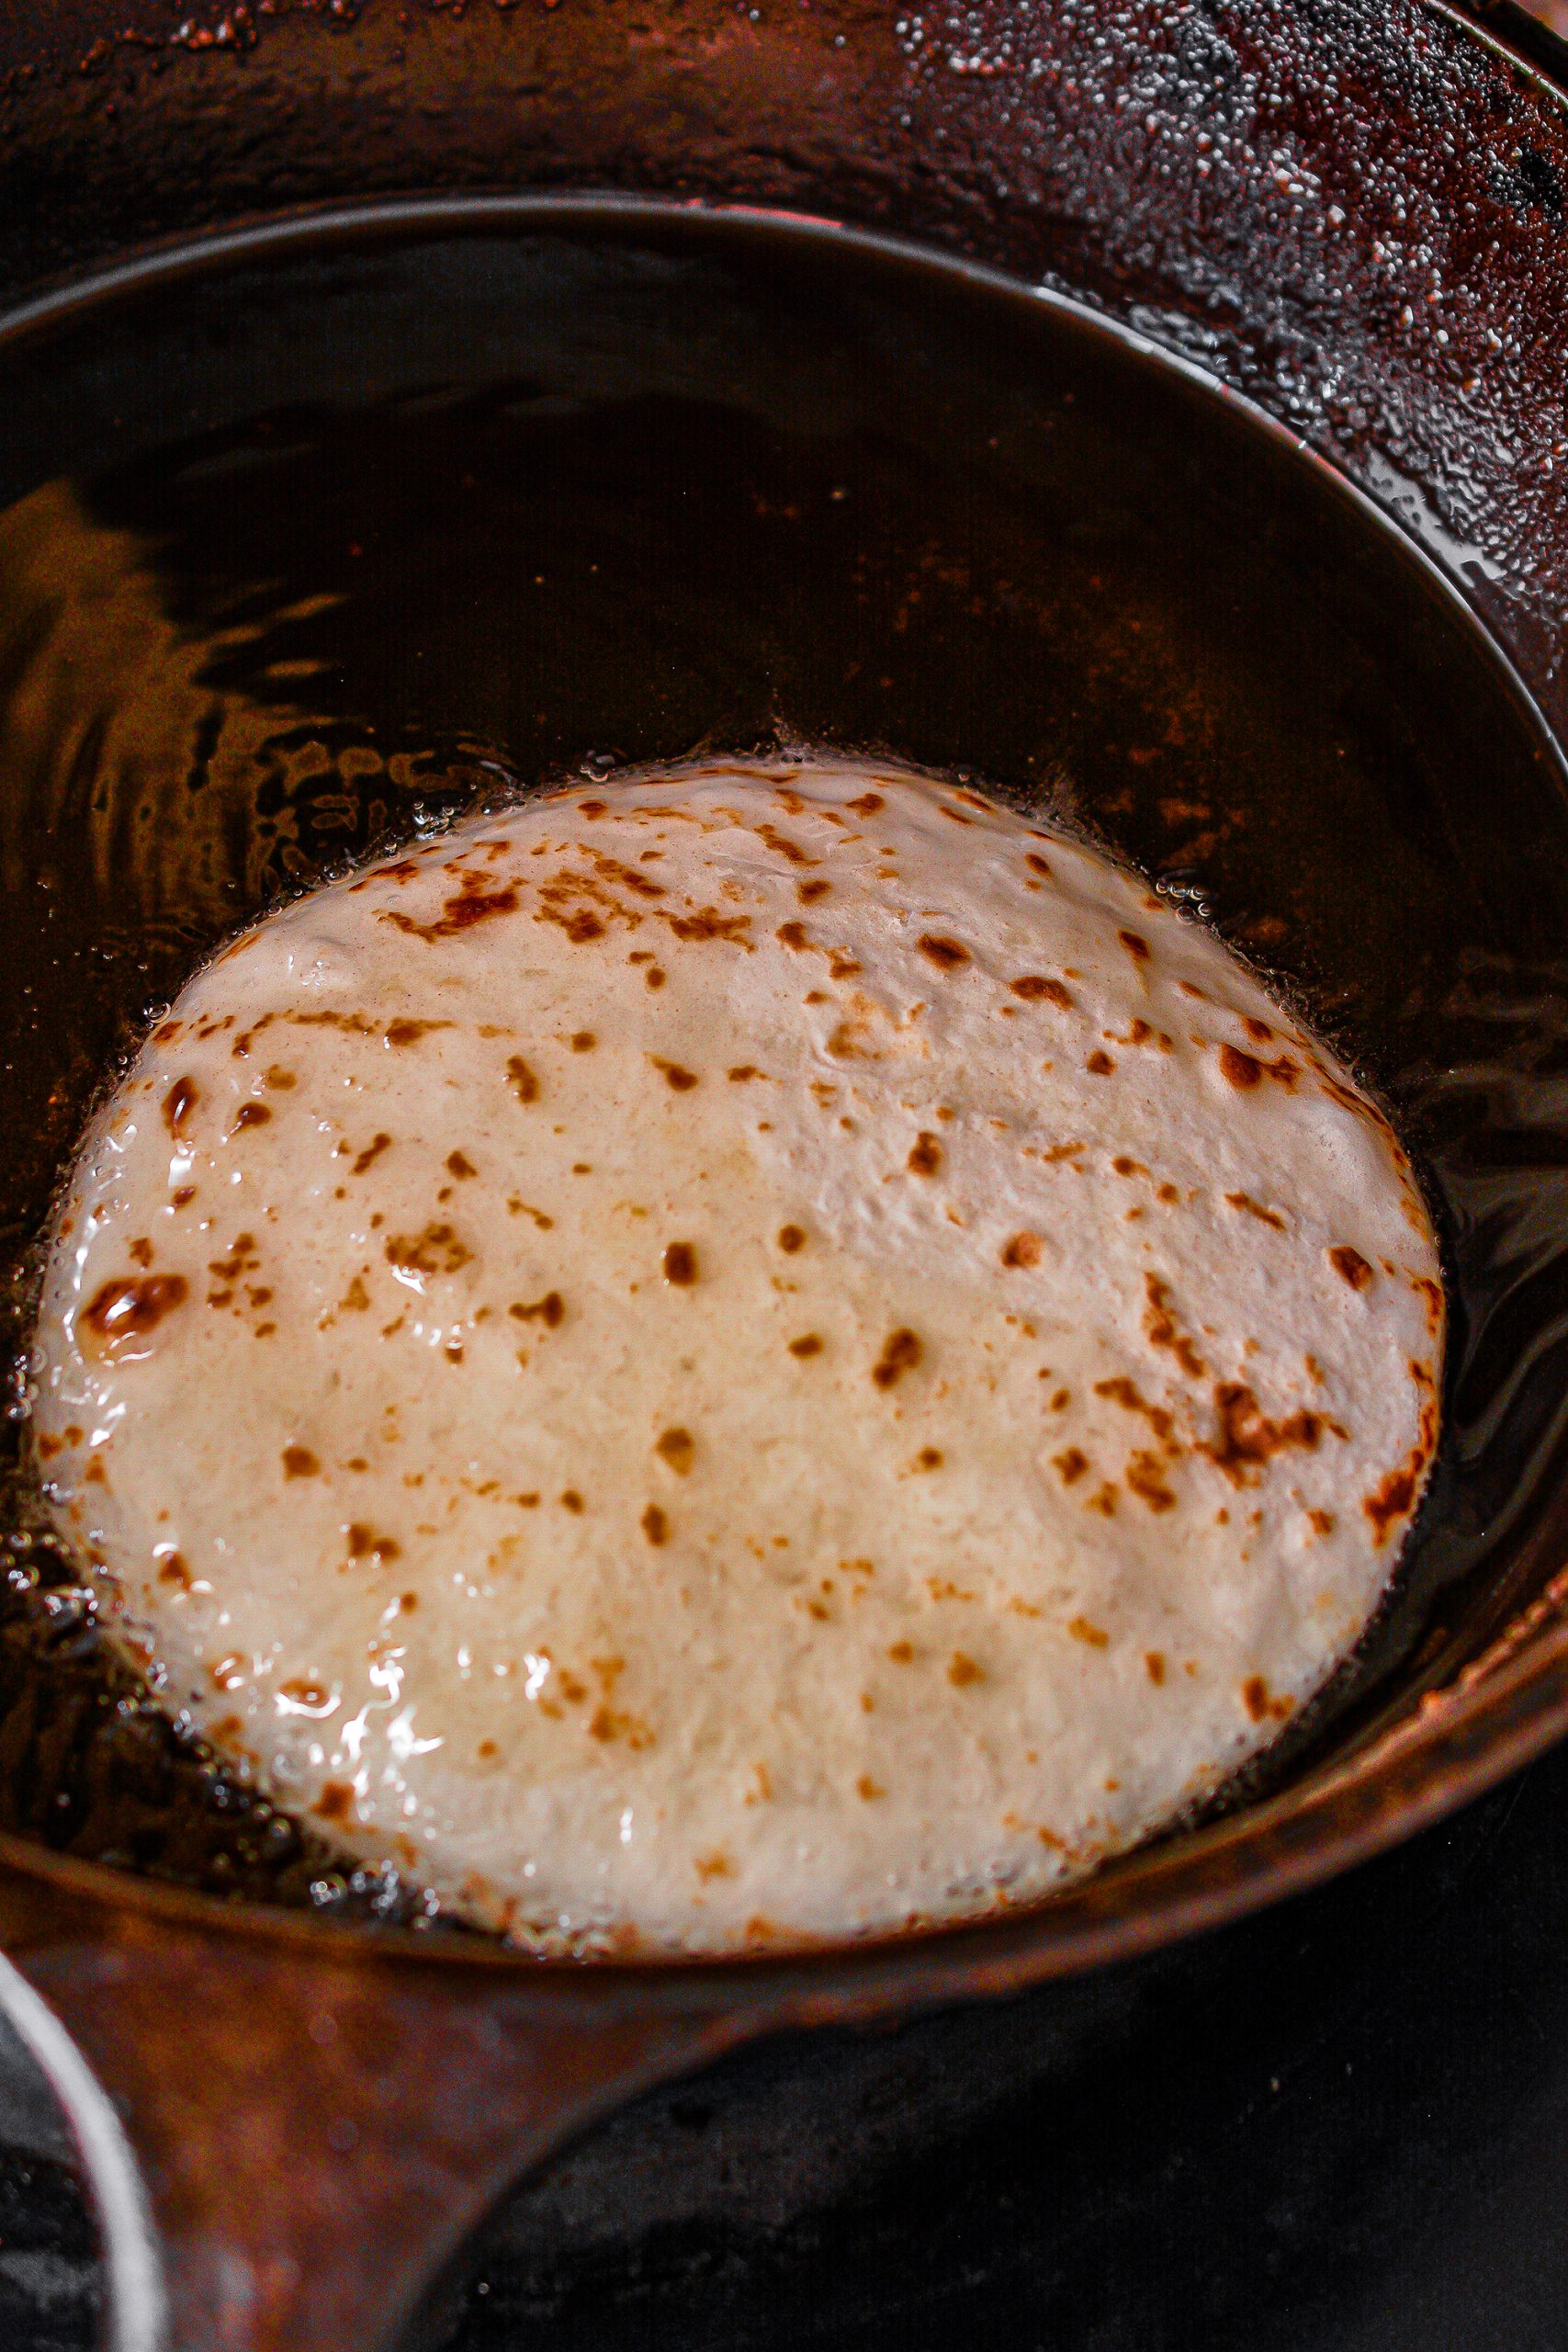 Fry the tortillas for 1 minute on each side until lightly browned and slightly crispy. 